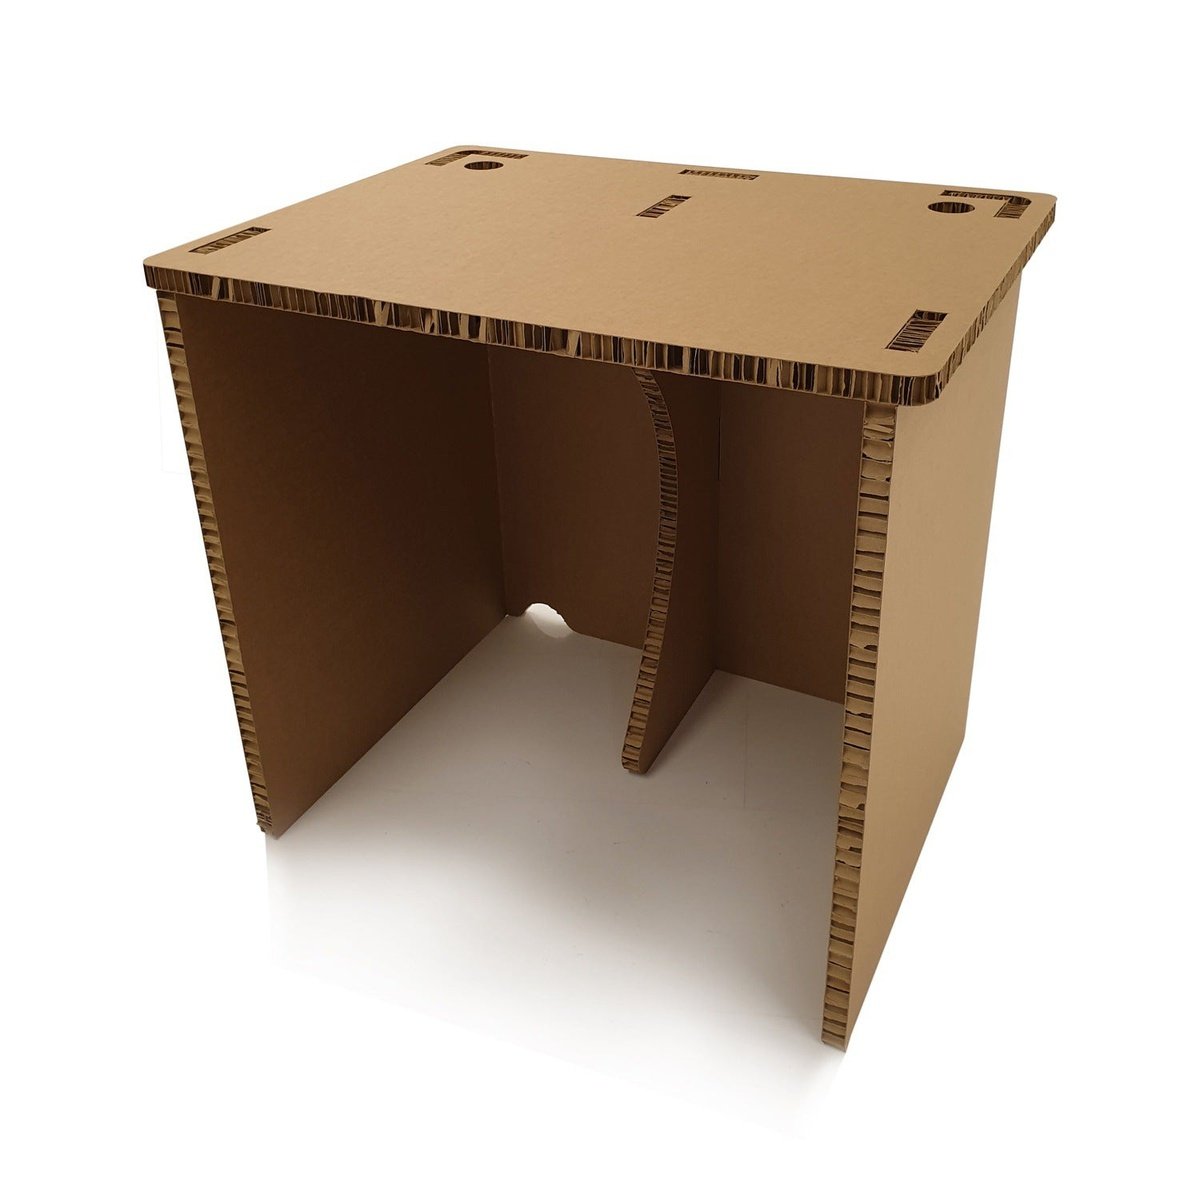 Eco Easy Desk - 590mm Width, 390mm Depth, 490mm Height - Sustainable & Compact Home Office Furniture